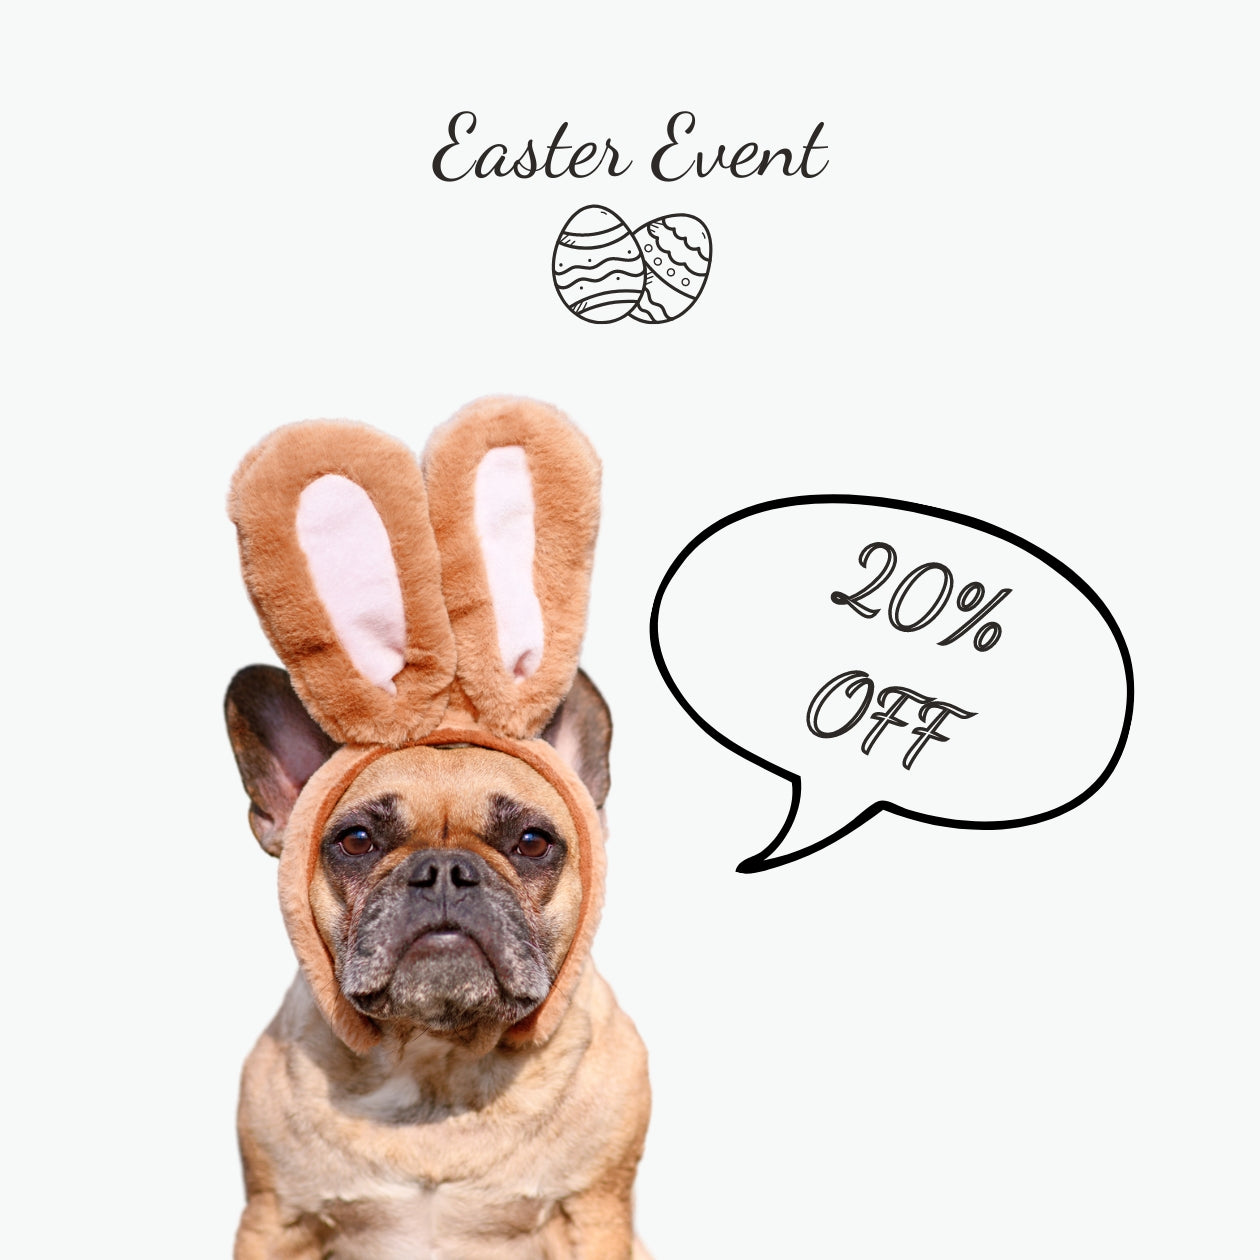 20% Off Pup & Kit Sale - Easter Event